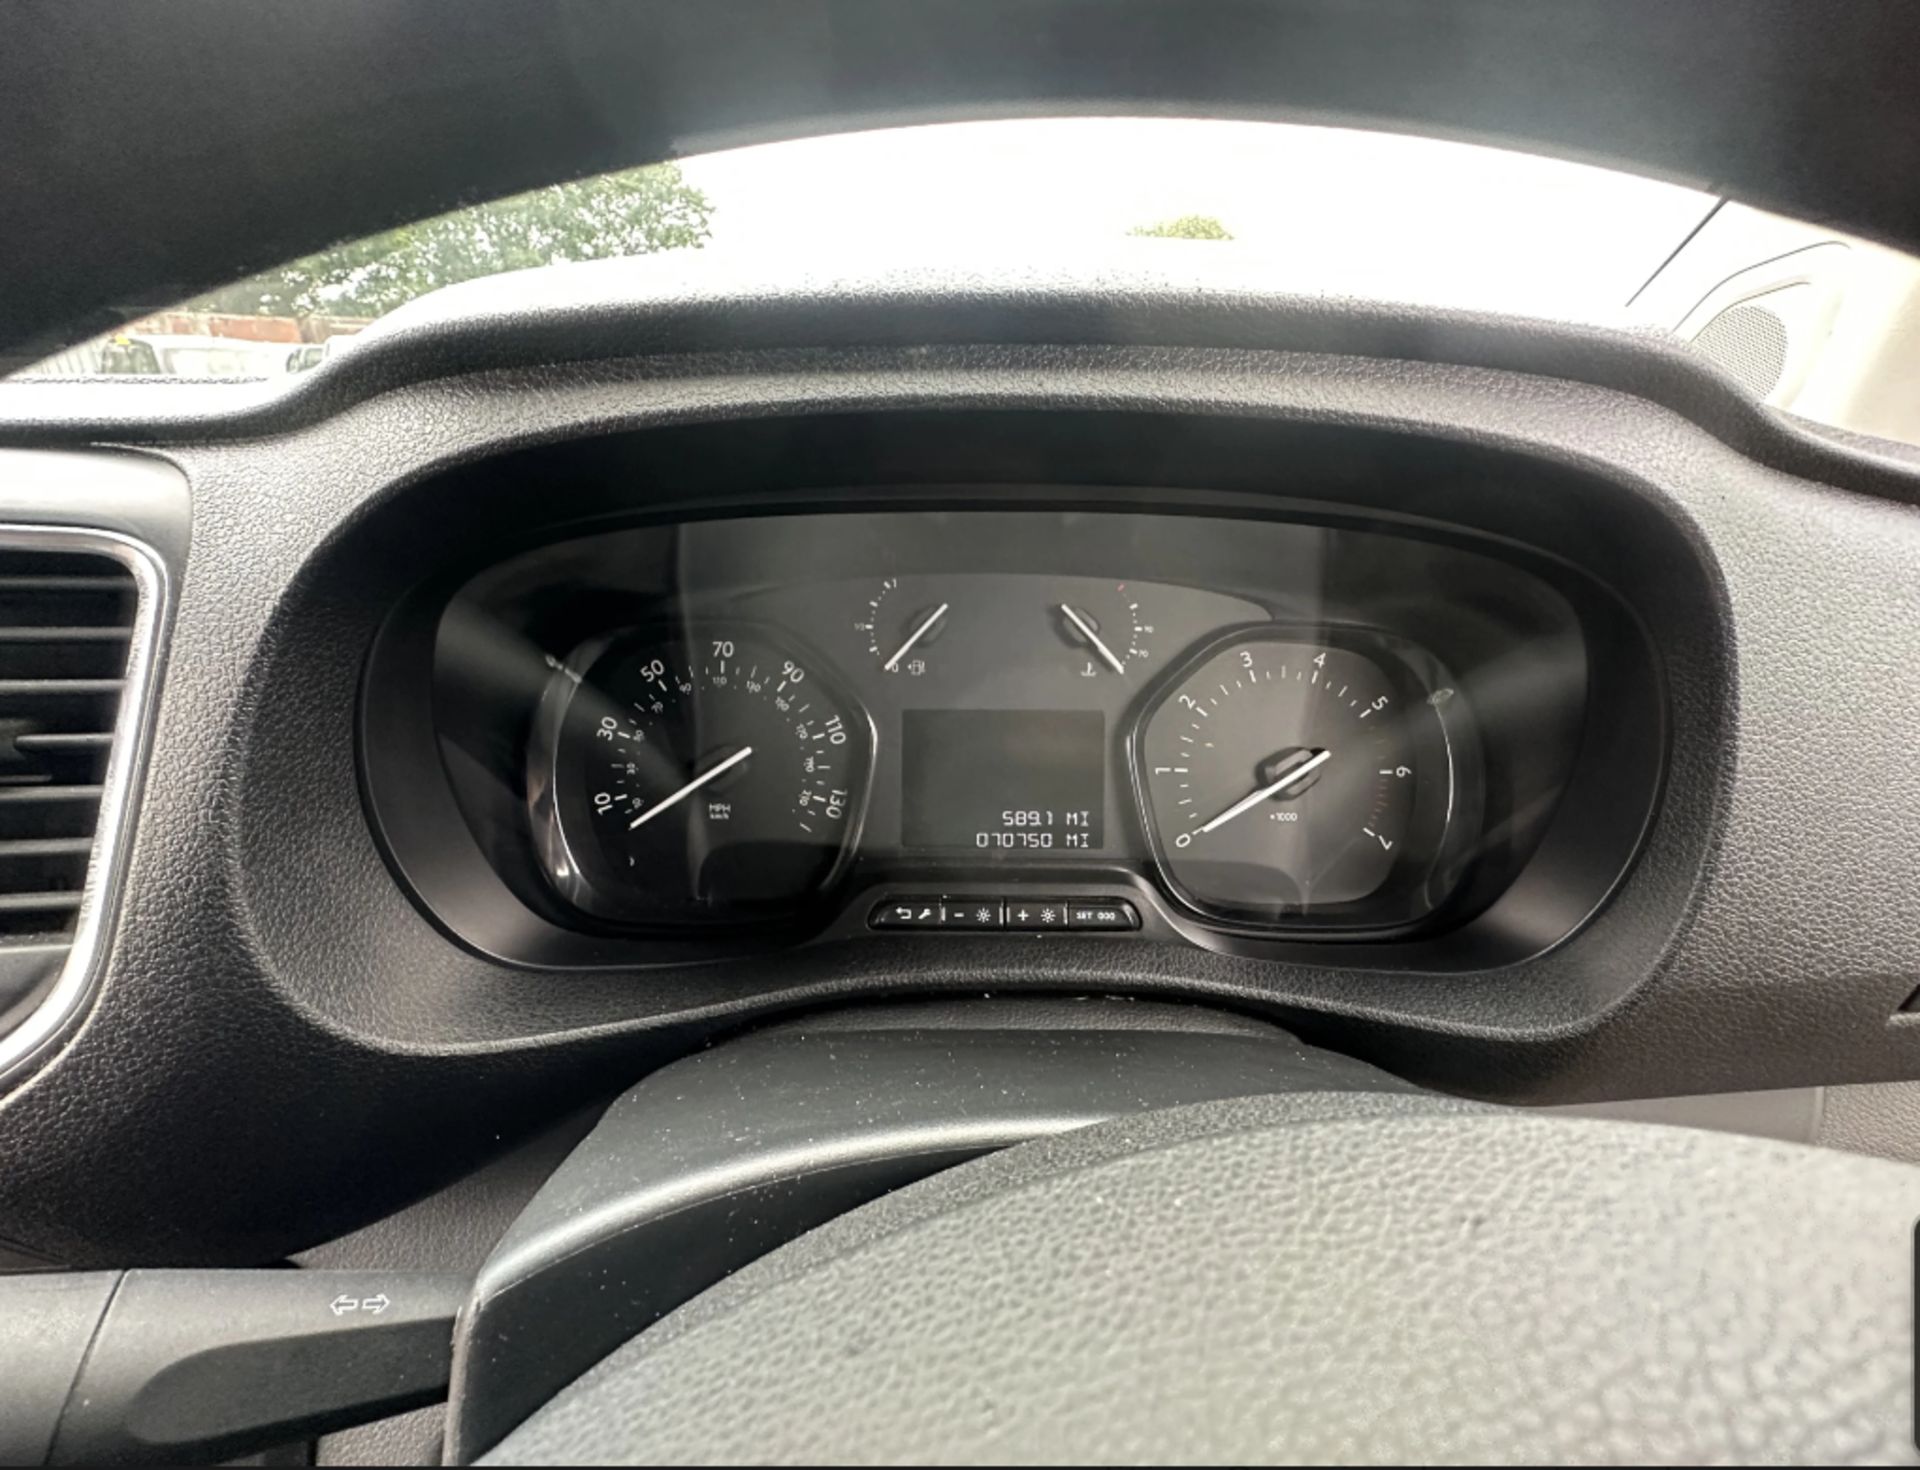 LOW-MILEAGE ONLY 70K MILES - 2019 VIVARO L2 DIESEL: READY TO ROLL - Image 8 of 11